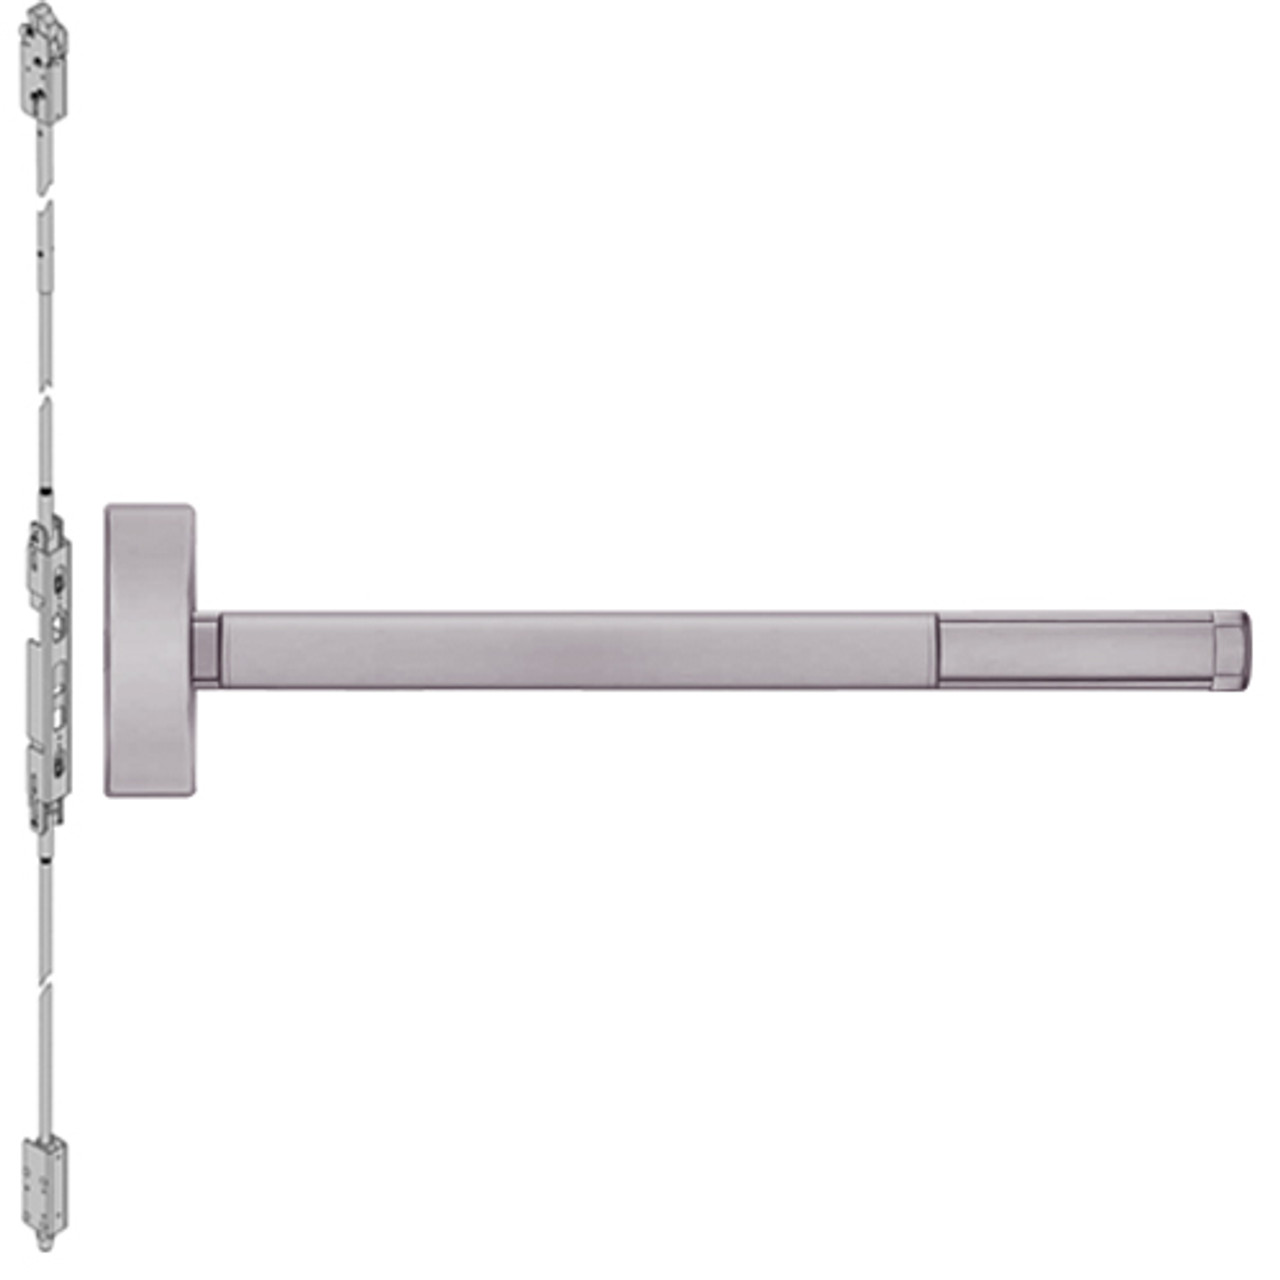 ELRFL2808LBR-630-48 PHI 2800 Series Fire Rated Concealed Vertical Rod Exit Device with Electric Latch Retraction Prepped for Key Controls Lever-Knob in Satin Stainless Steel Finish